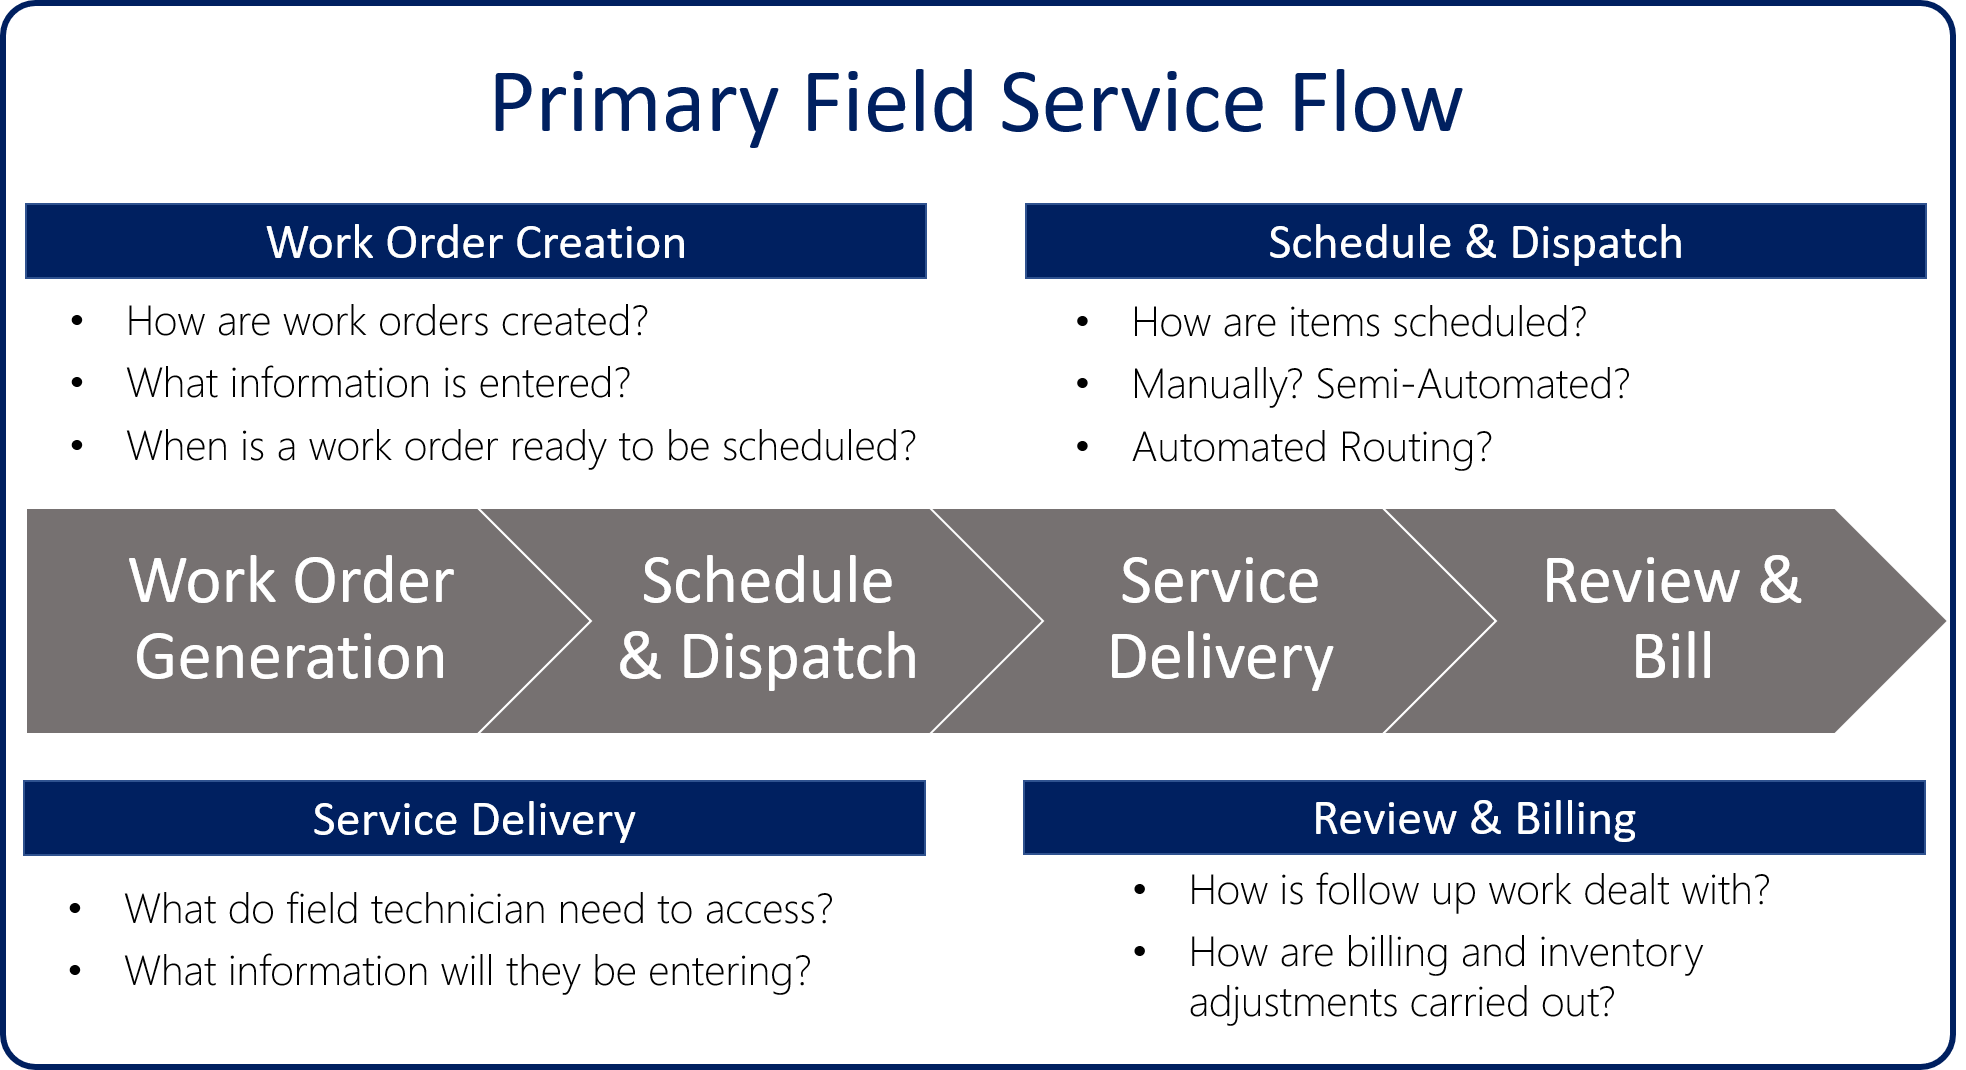 Diagram of a Primary Field Service Flow with Work Order Generation, Schedule & Dispatch, Service Delivery, and Review & Bill.